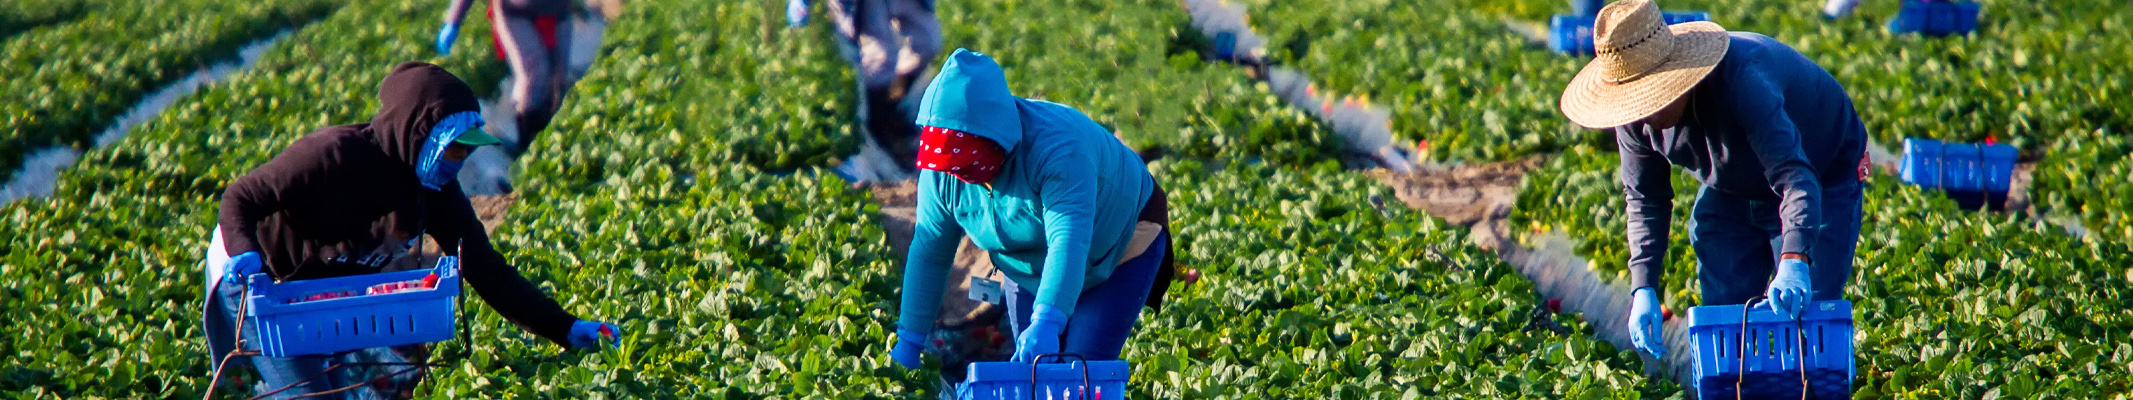 farm workers pucking strawberries